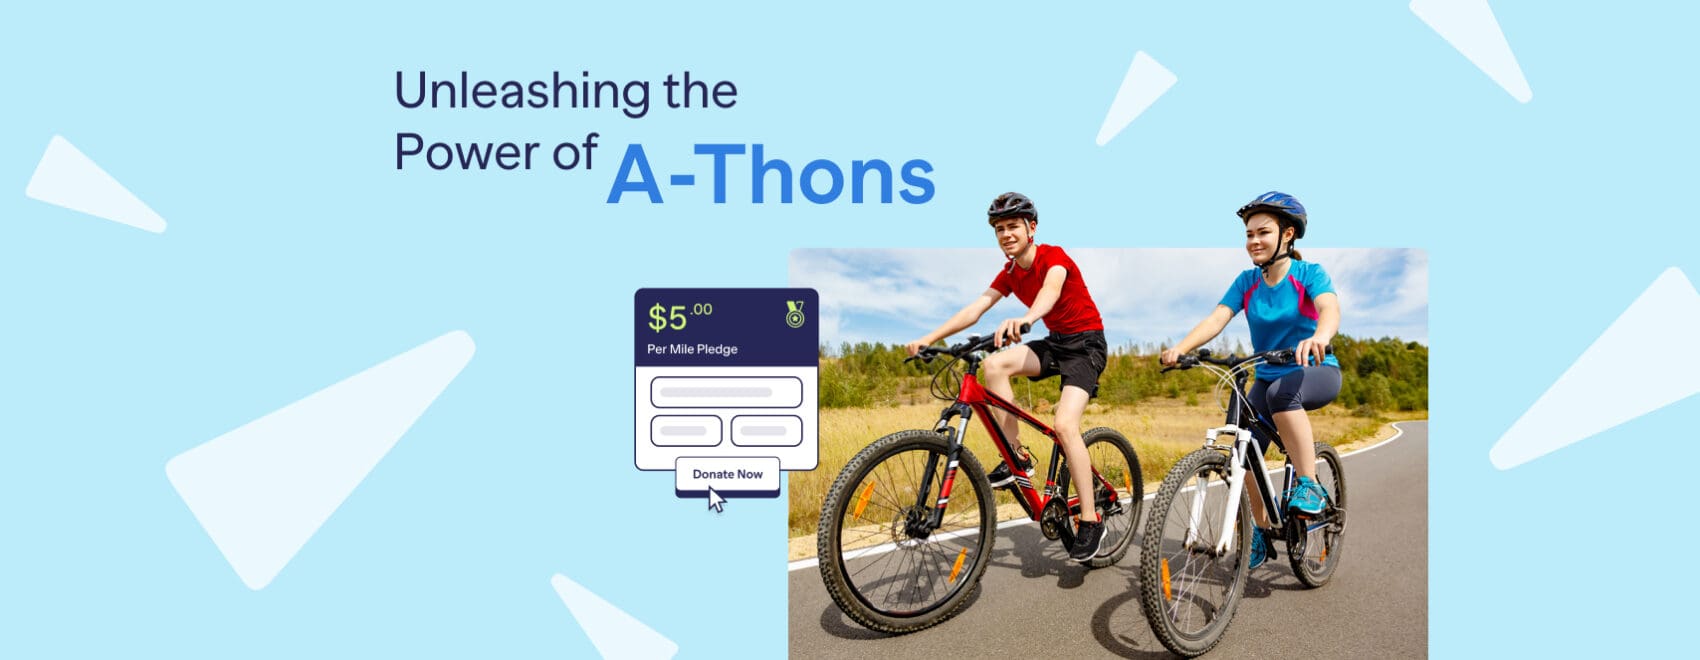 Unleashing the Power of 'A Thons'